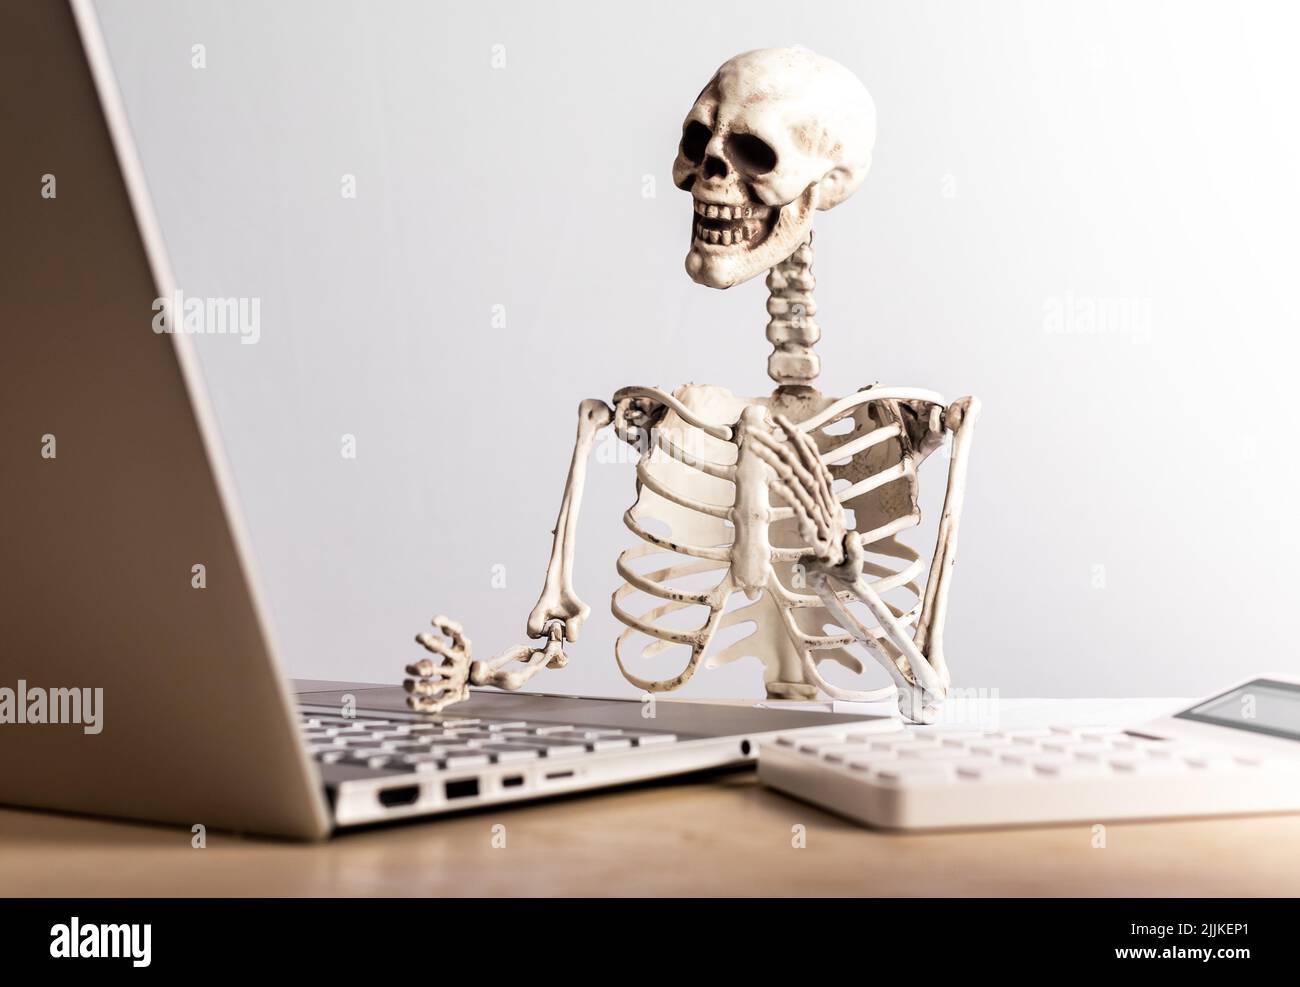 Job burnout. Skeleton sitting at table with laptop and calculator. Computer geek. Mental and physical exhaustion, fatigue, stress from work overload, deadlines. High quality photo Stock Photo